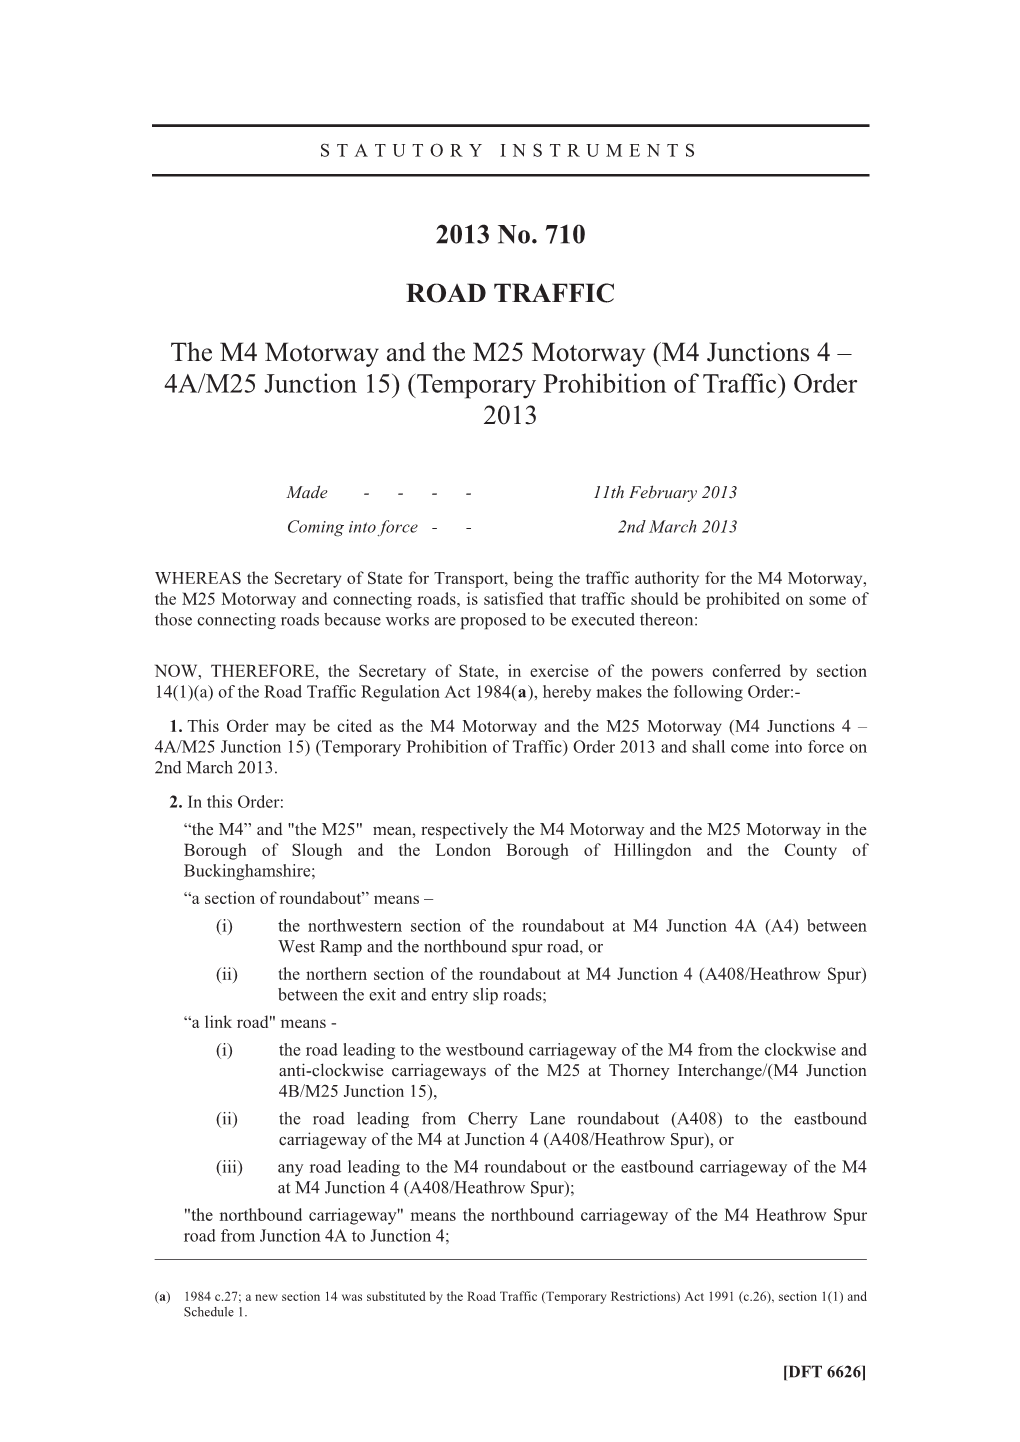 The M4 Motorway and the M25 Motorway (M4 Junctions 4 – 4A/M25 Junction 15) (Temporary Prohibition of Traffic) Order 2013